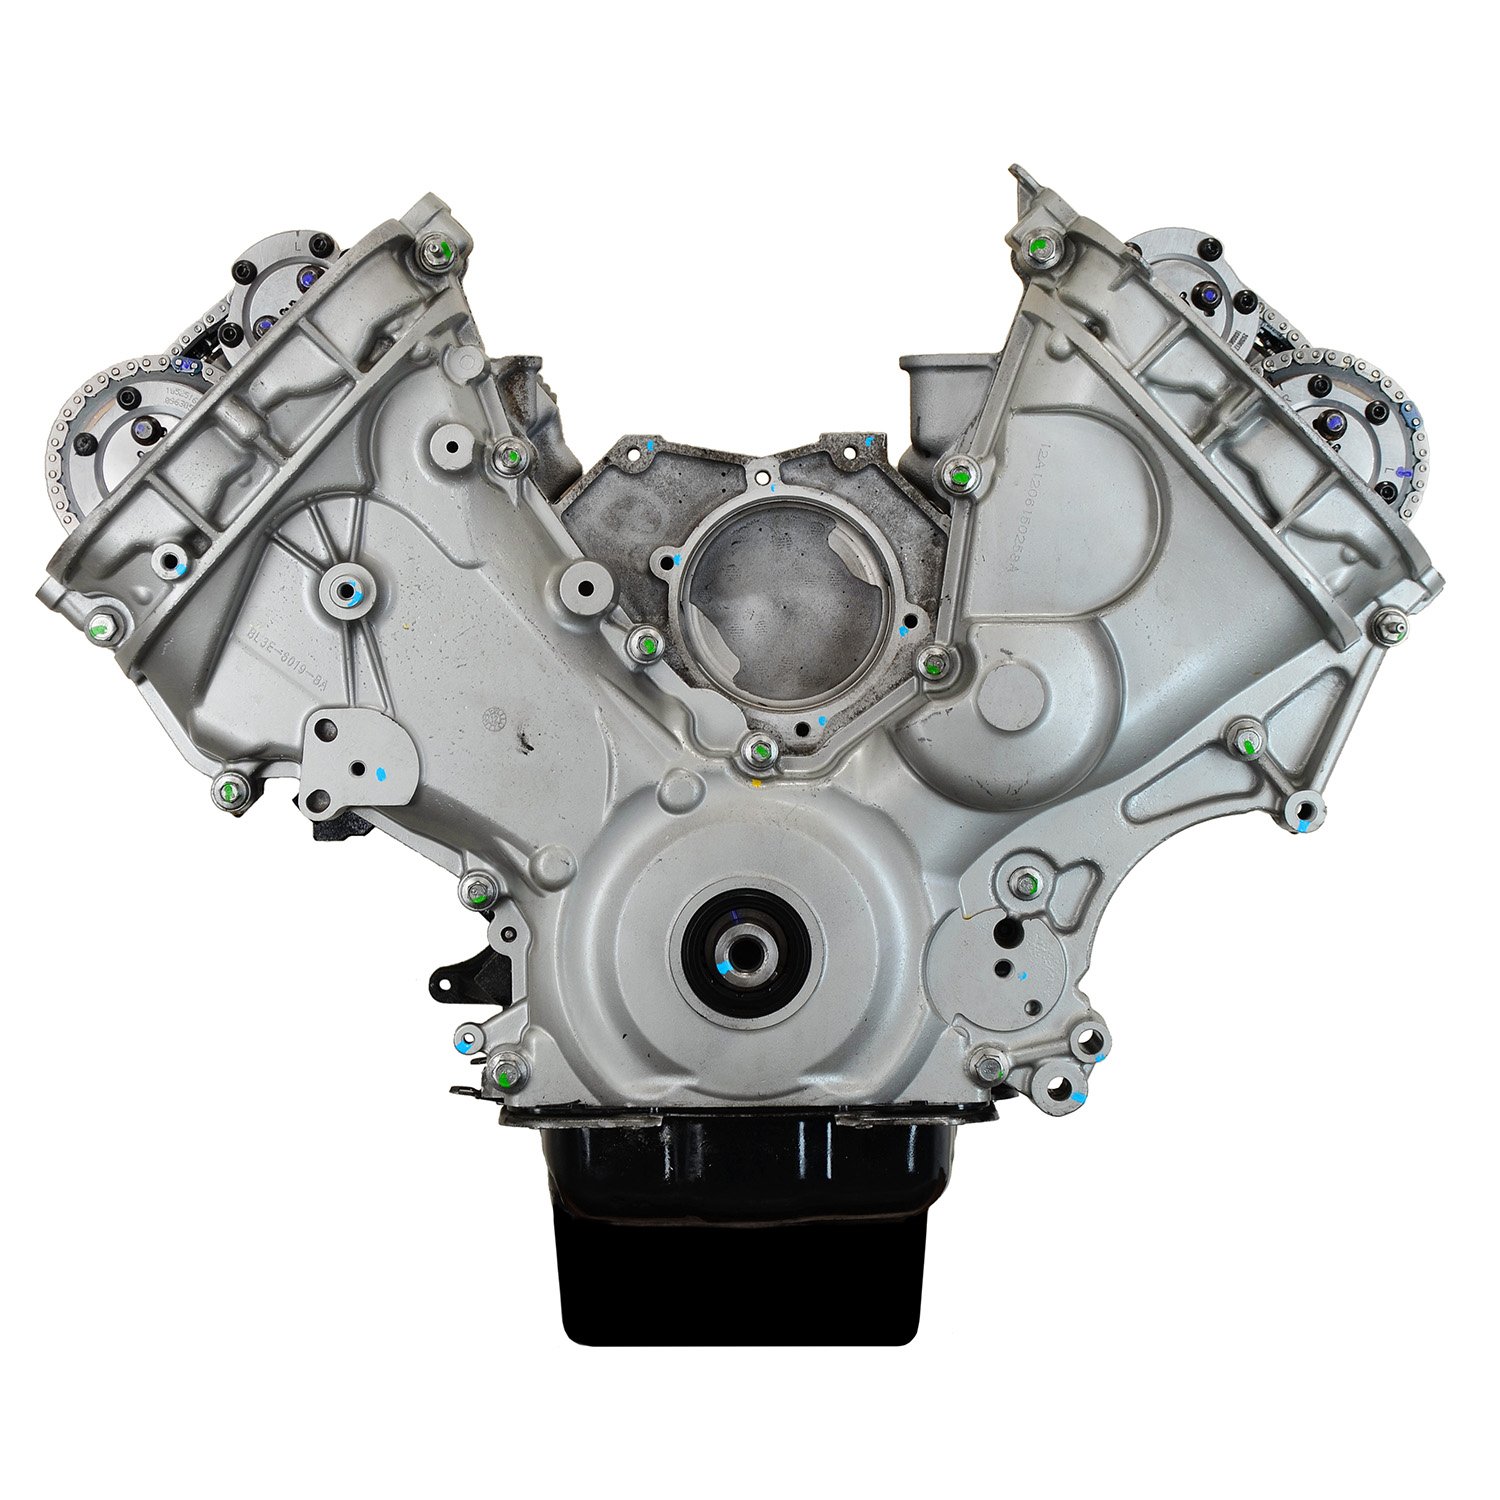 DFFG Remanufactured Crate Engine for 2011-2014 Ford F-150